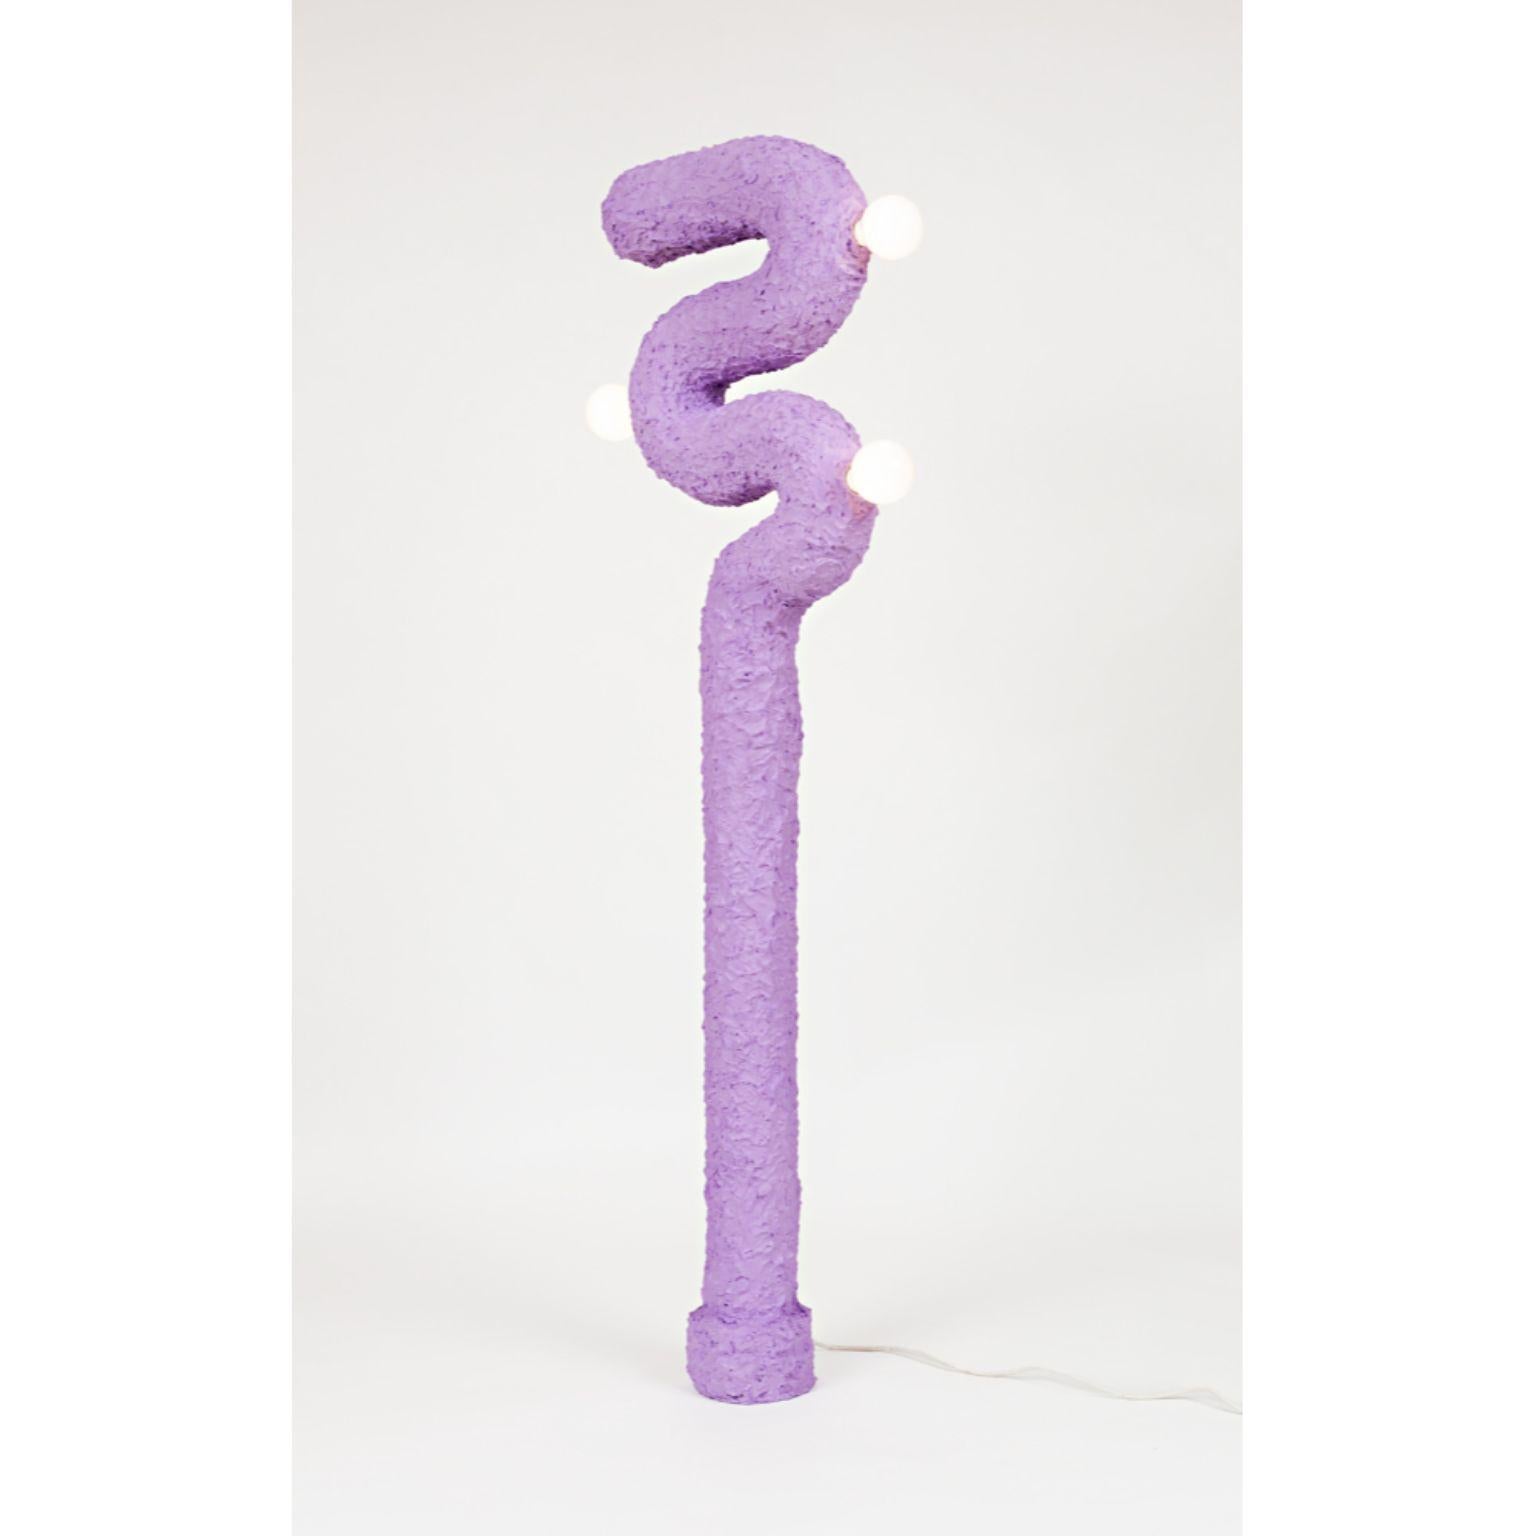 Lampadulure floor lamp by BehaghelFoiny design
2020
Materials: Aluminium, plaster
Dimensions: 65 x 10 x 167 cm

All our lamps can be wired according to each country. If sold to the USA it will be wired for the USA for instance.

